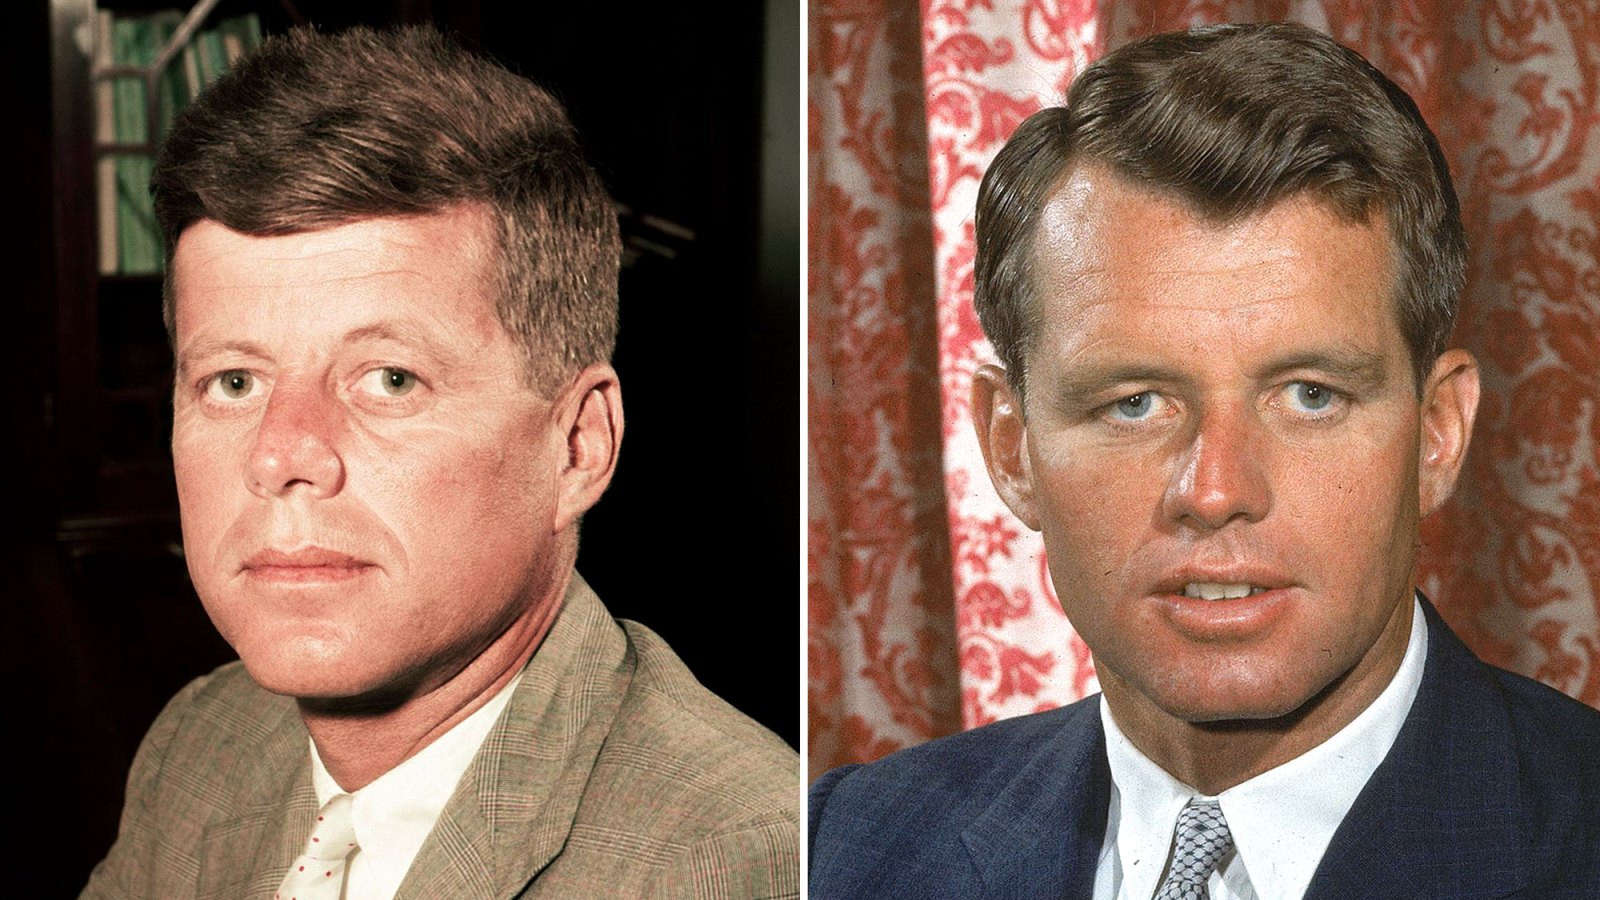 Is the Kennedy Family Curse Real? ‘Fatal Voyage’ Podcast Recounts Horrifying 'Tragedies' and 'Reckless' Behavior'